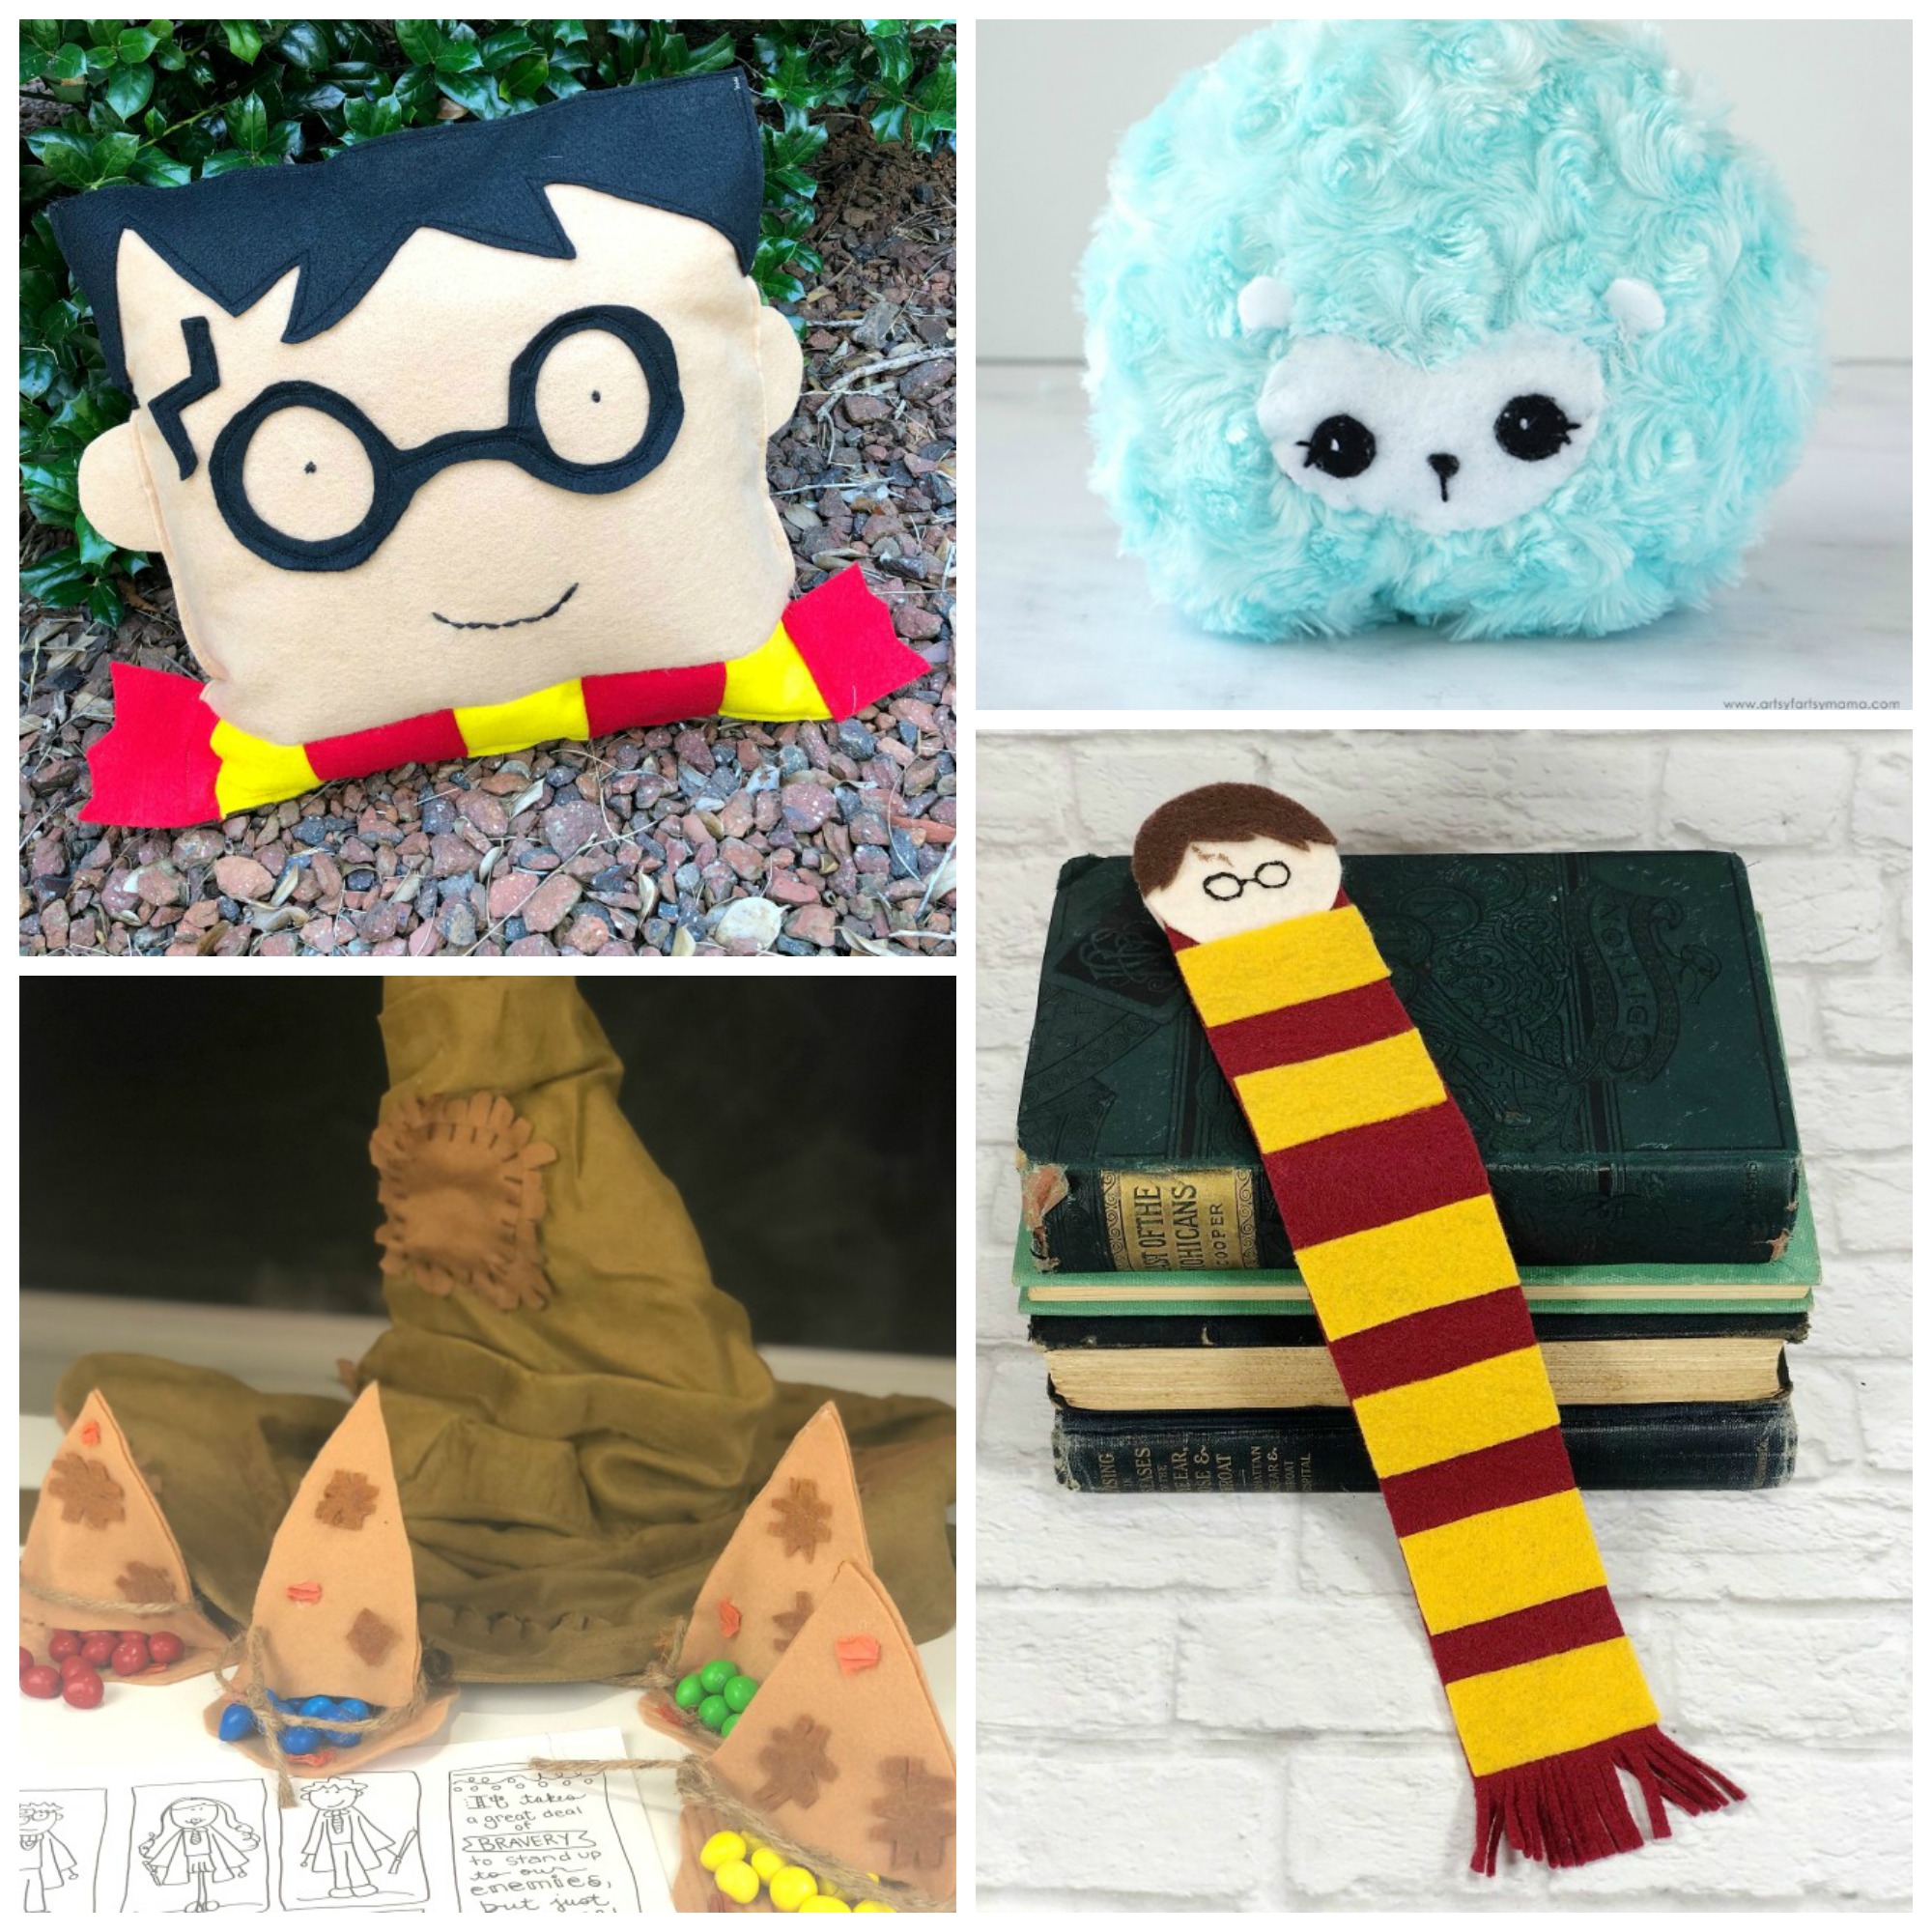 Harry Potter Crafts for Kids - That Kids' Craft Site